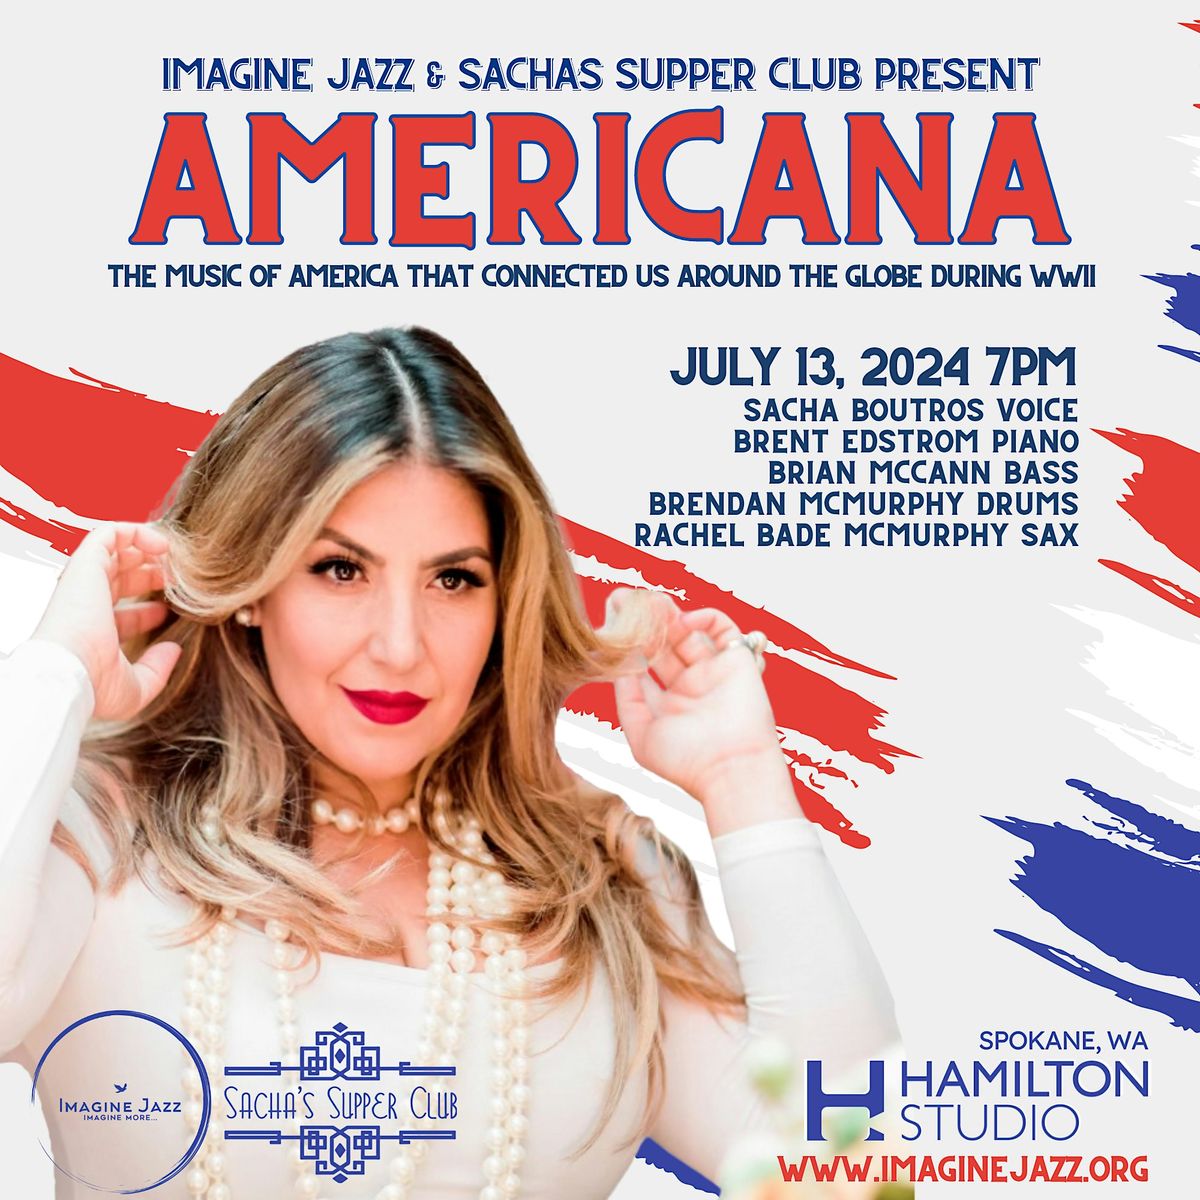 Sacha Boutros Jazz Quartet - Americana, the music of WWII that connected us